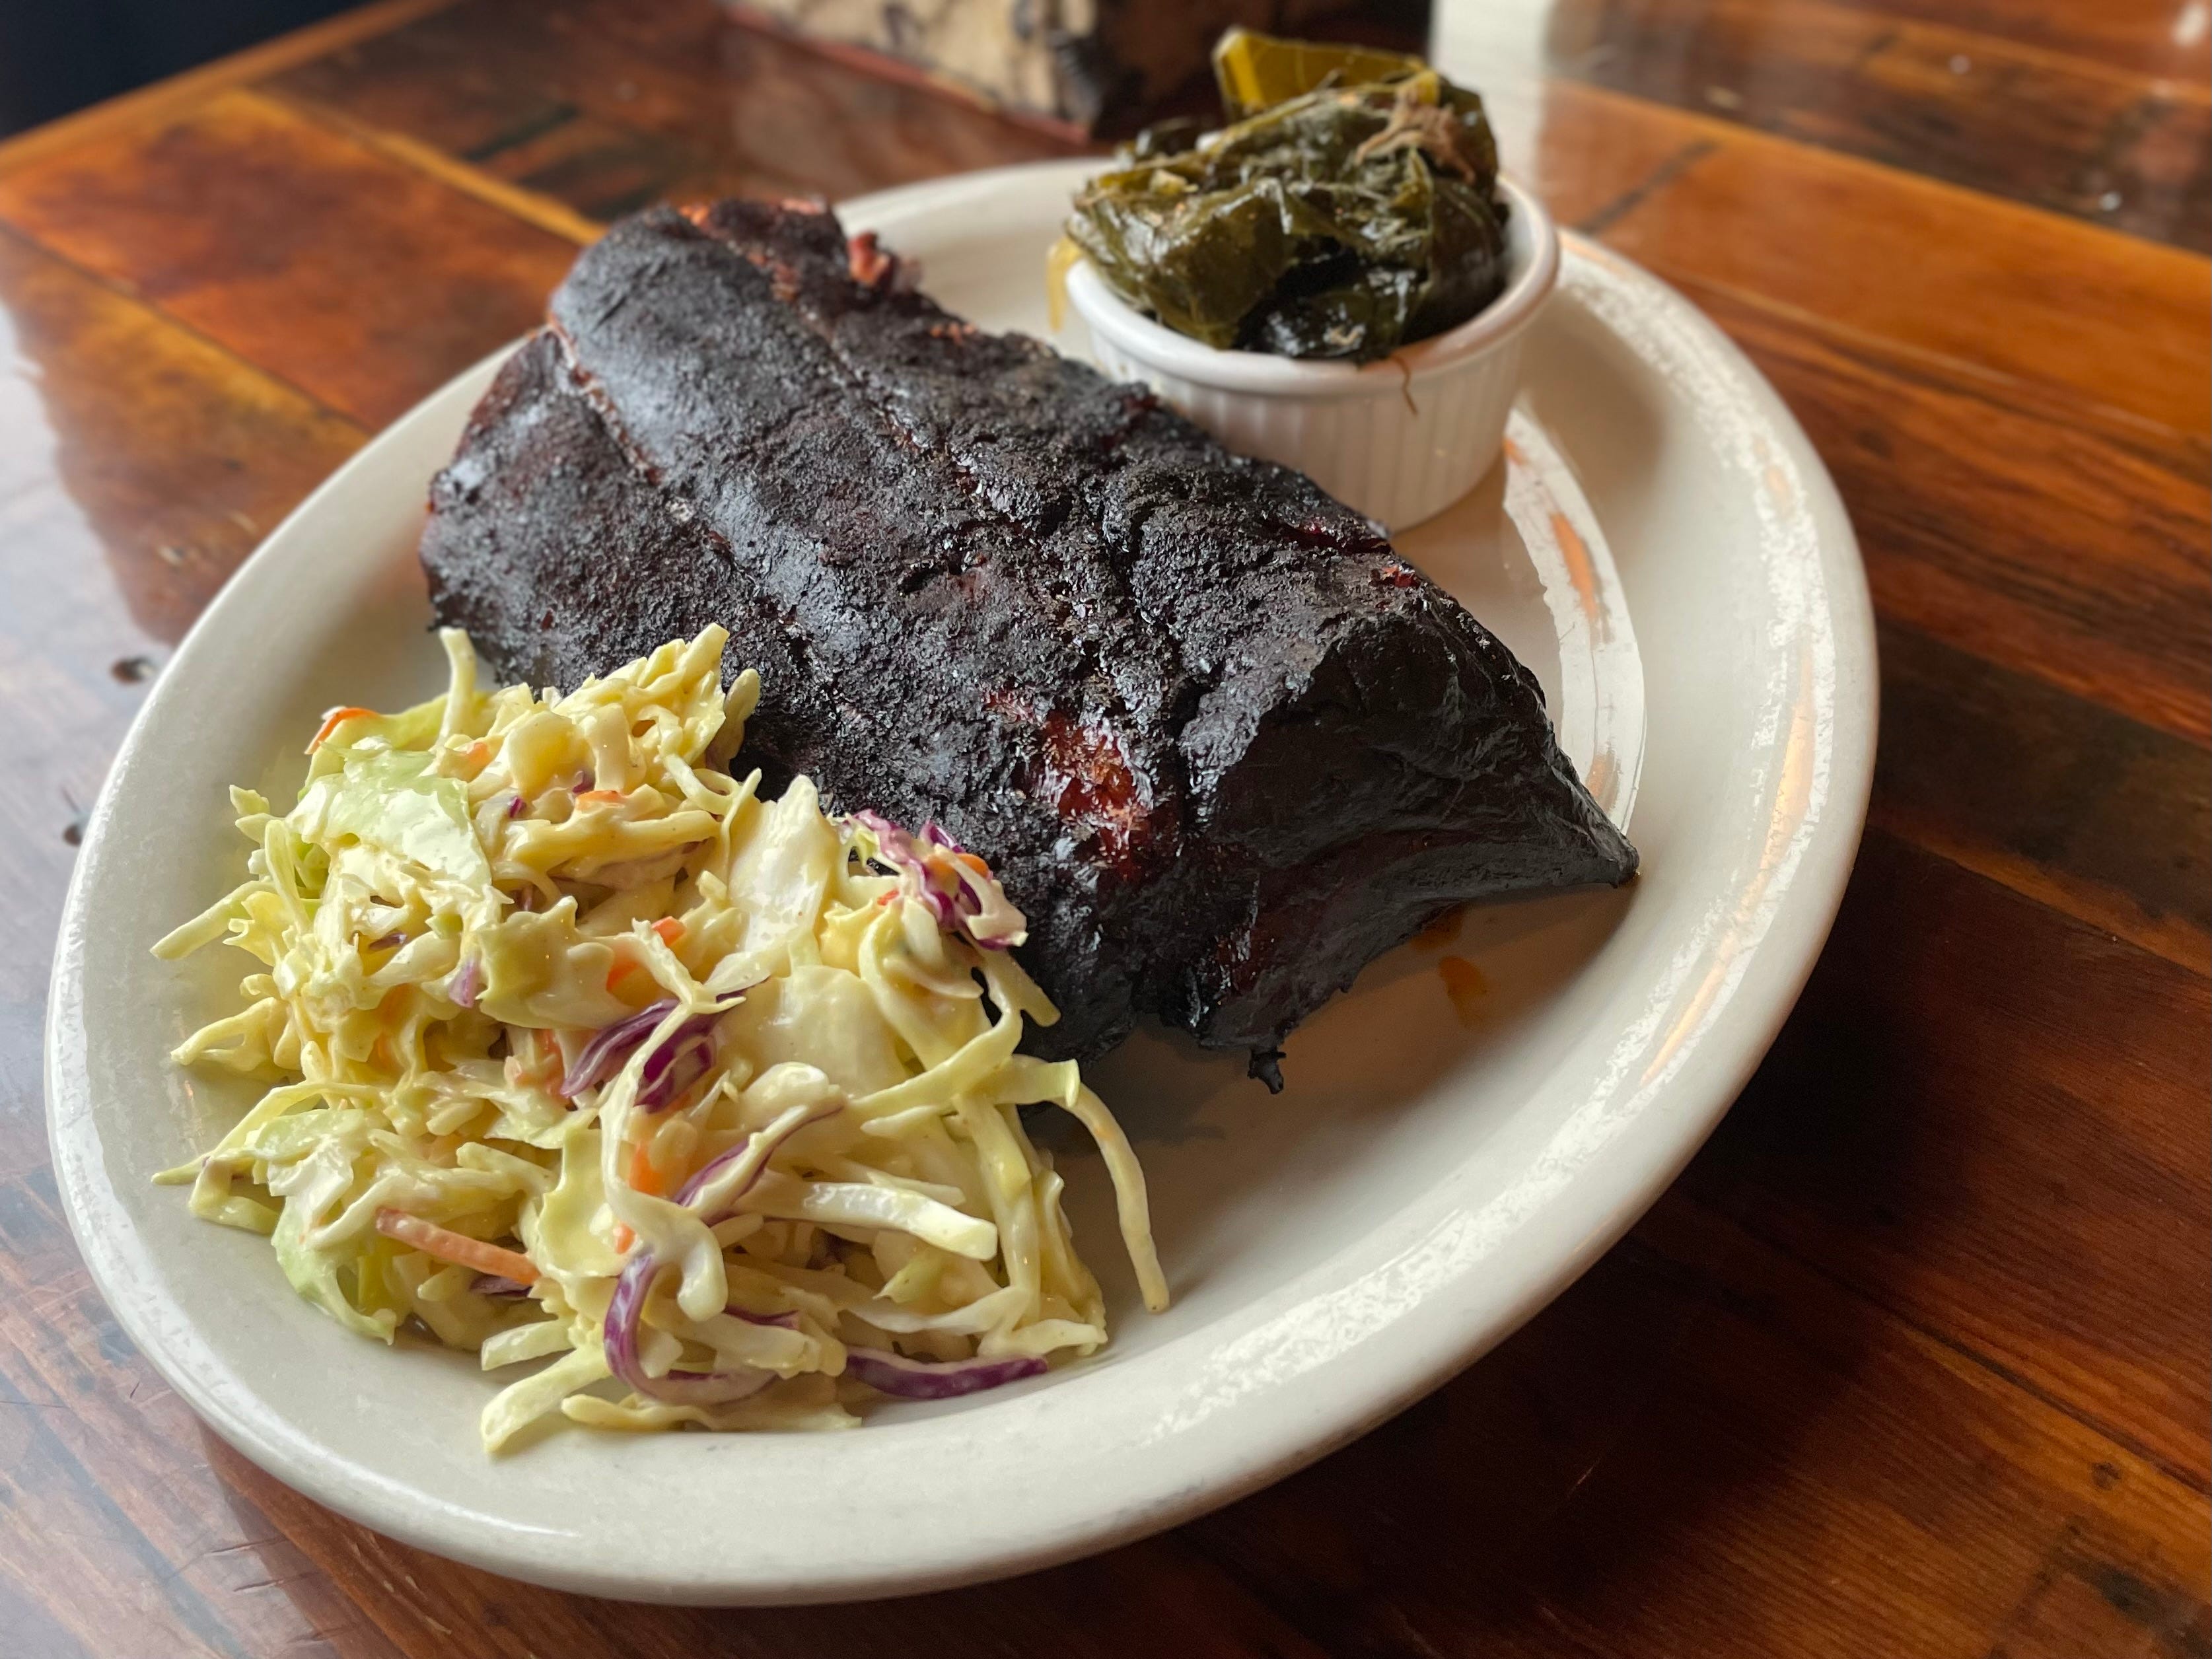 Ribs with coleslaw and collard greens at Flying Mango in Beaverdale